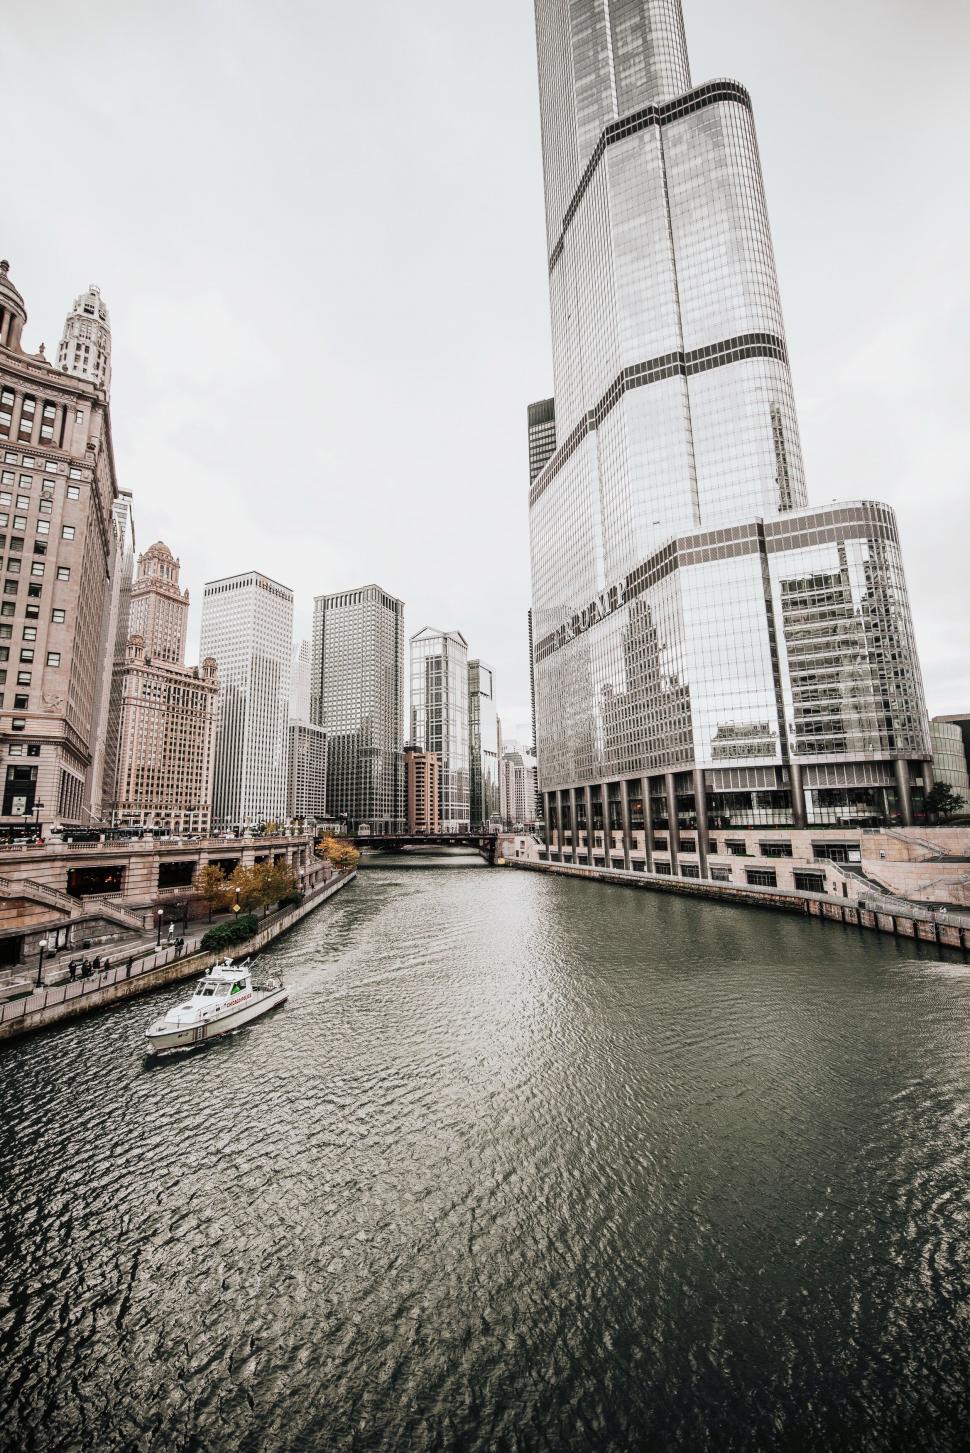 Free Image of Chicago cityscape with skyscrapers and river 